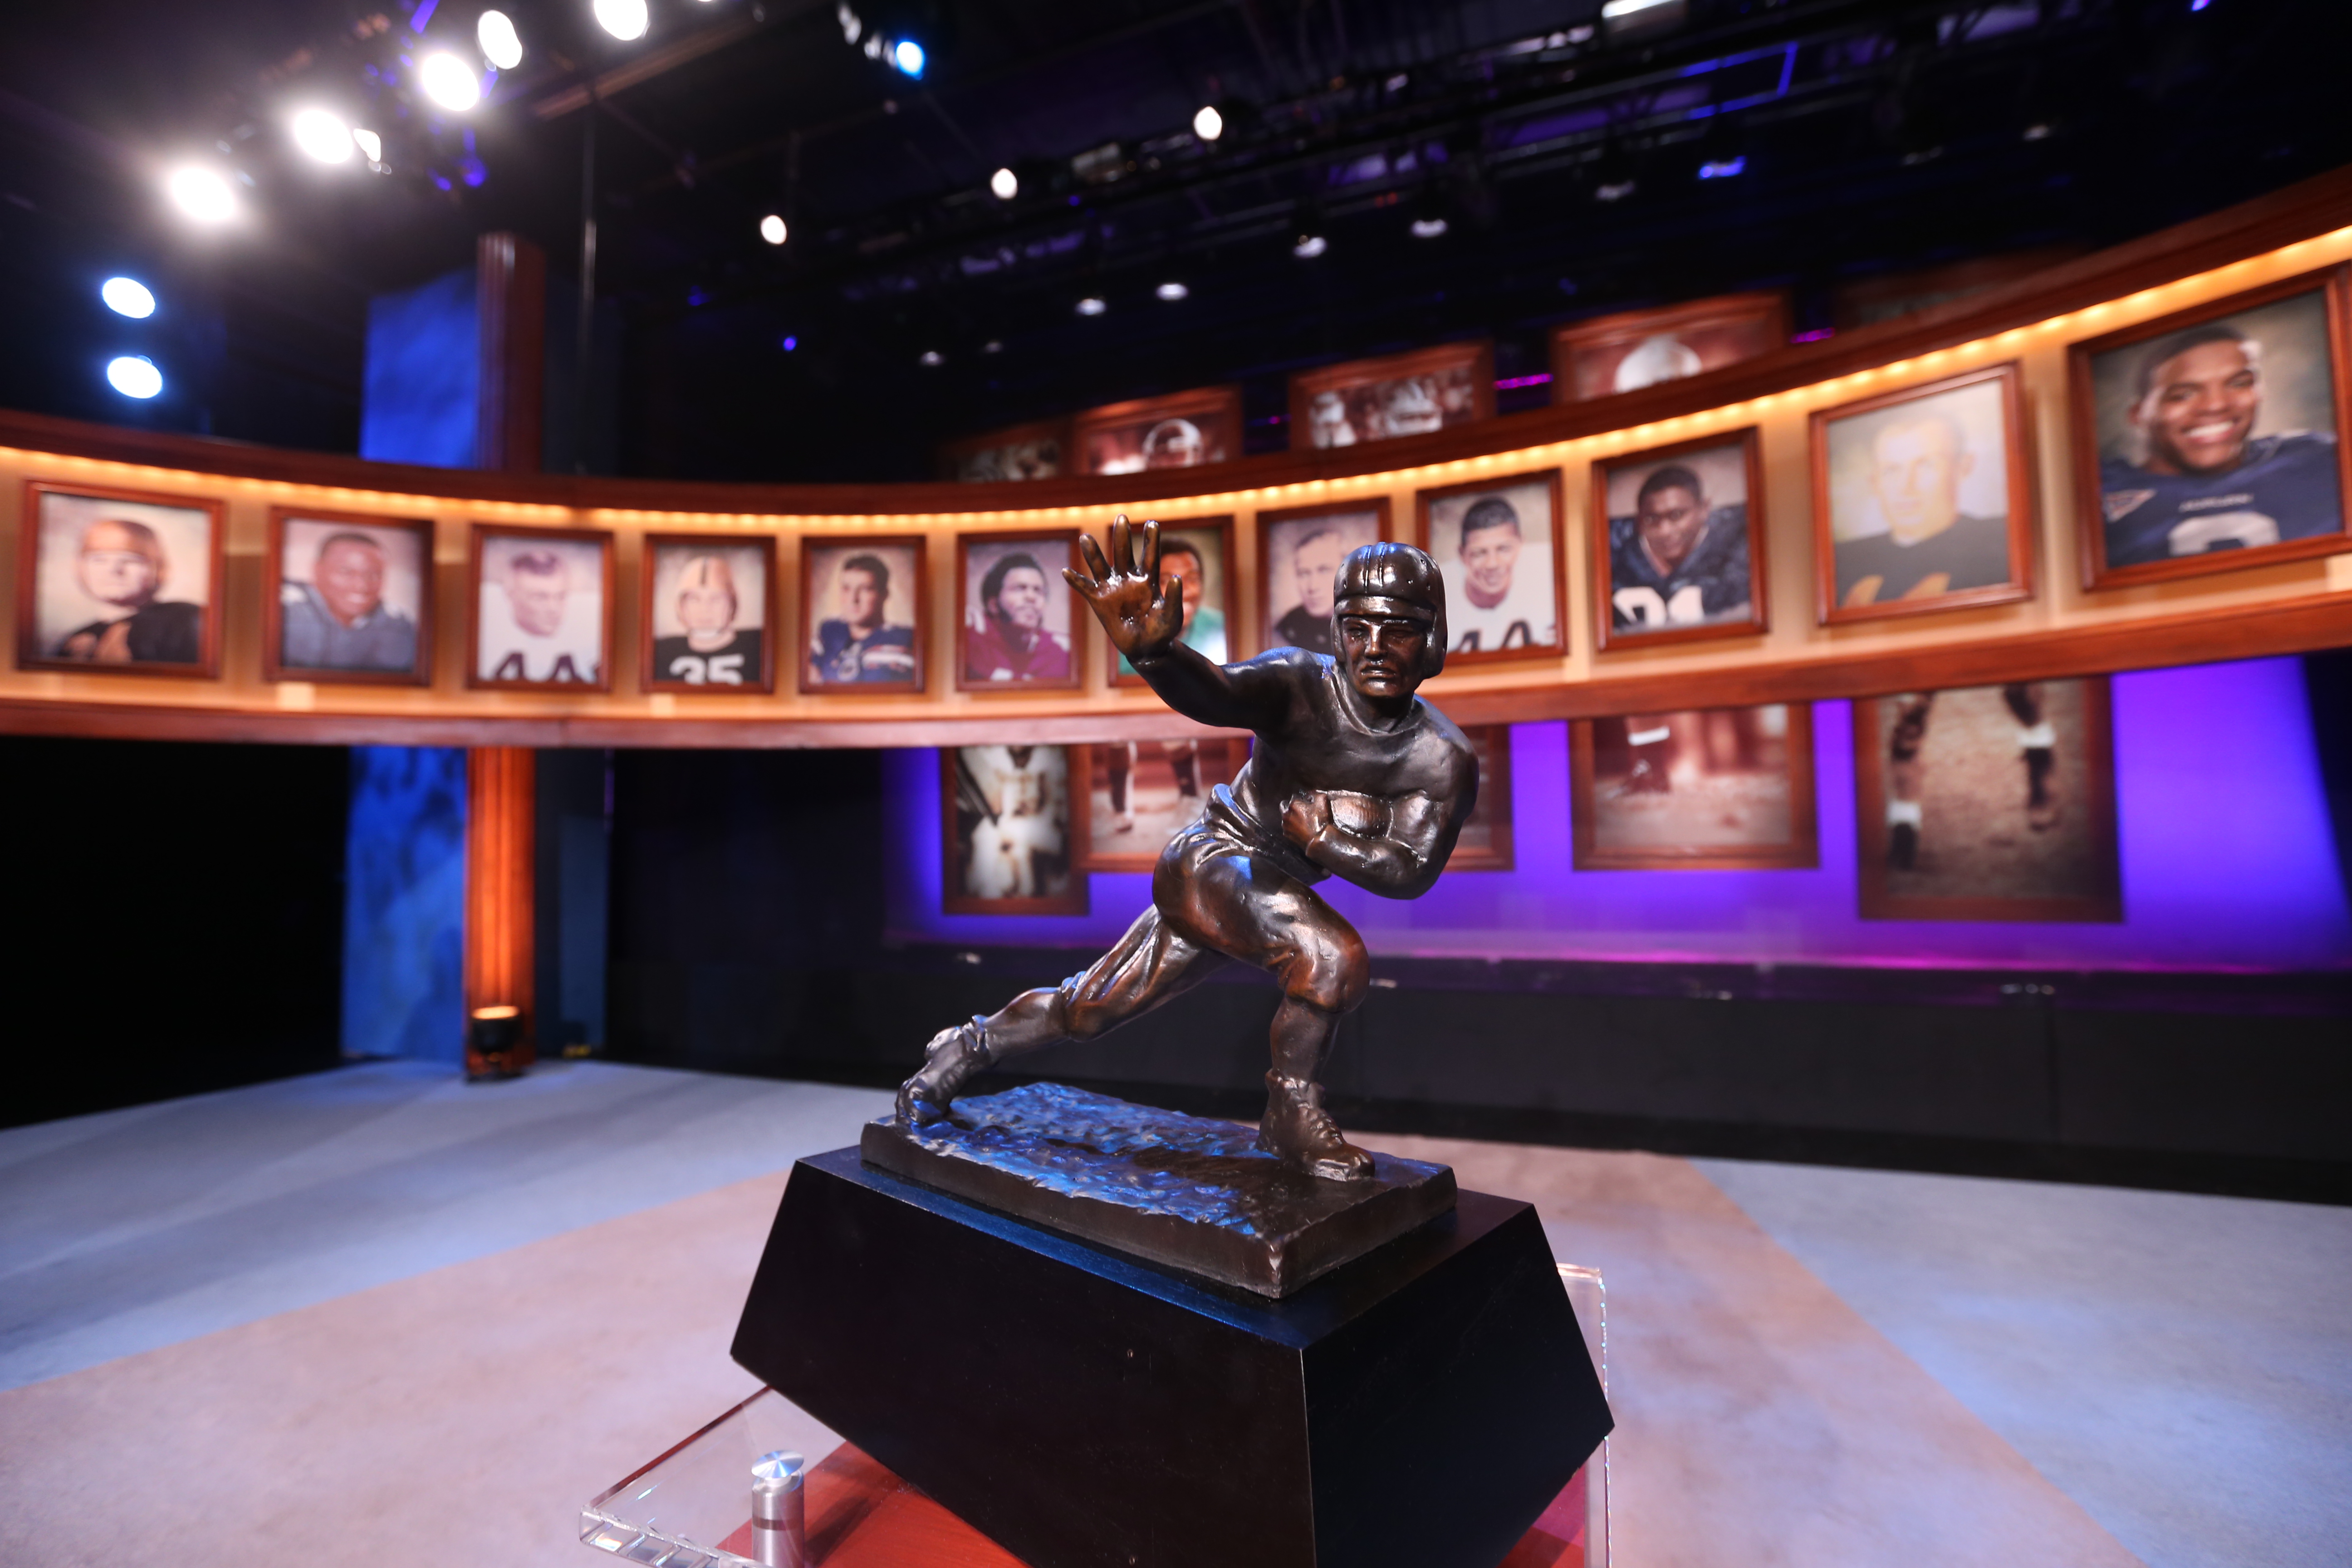 The Heisman Trophy surrounded by photos of past winners